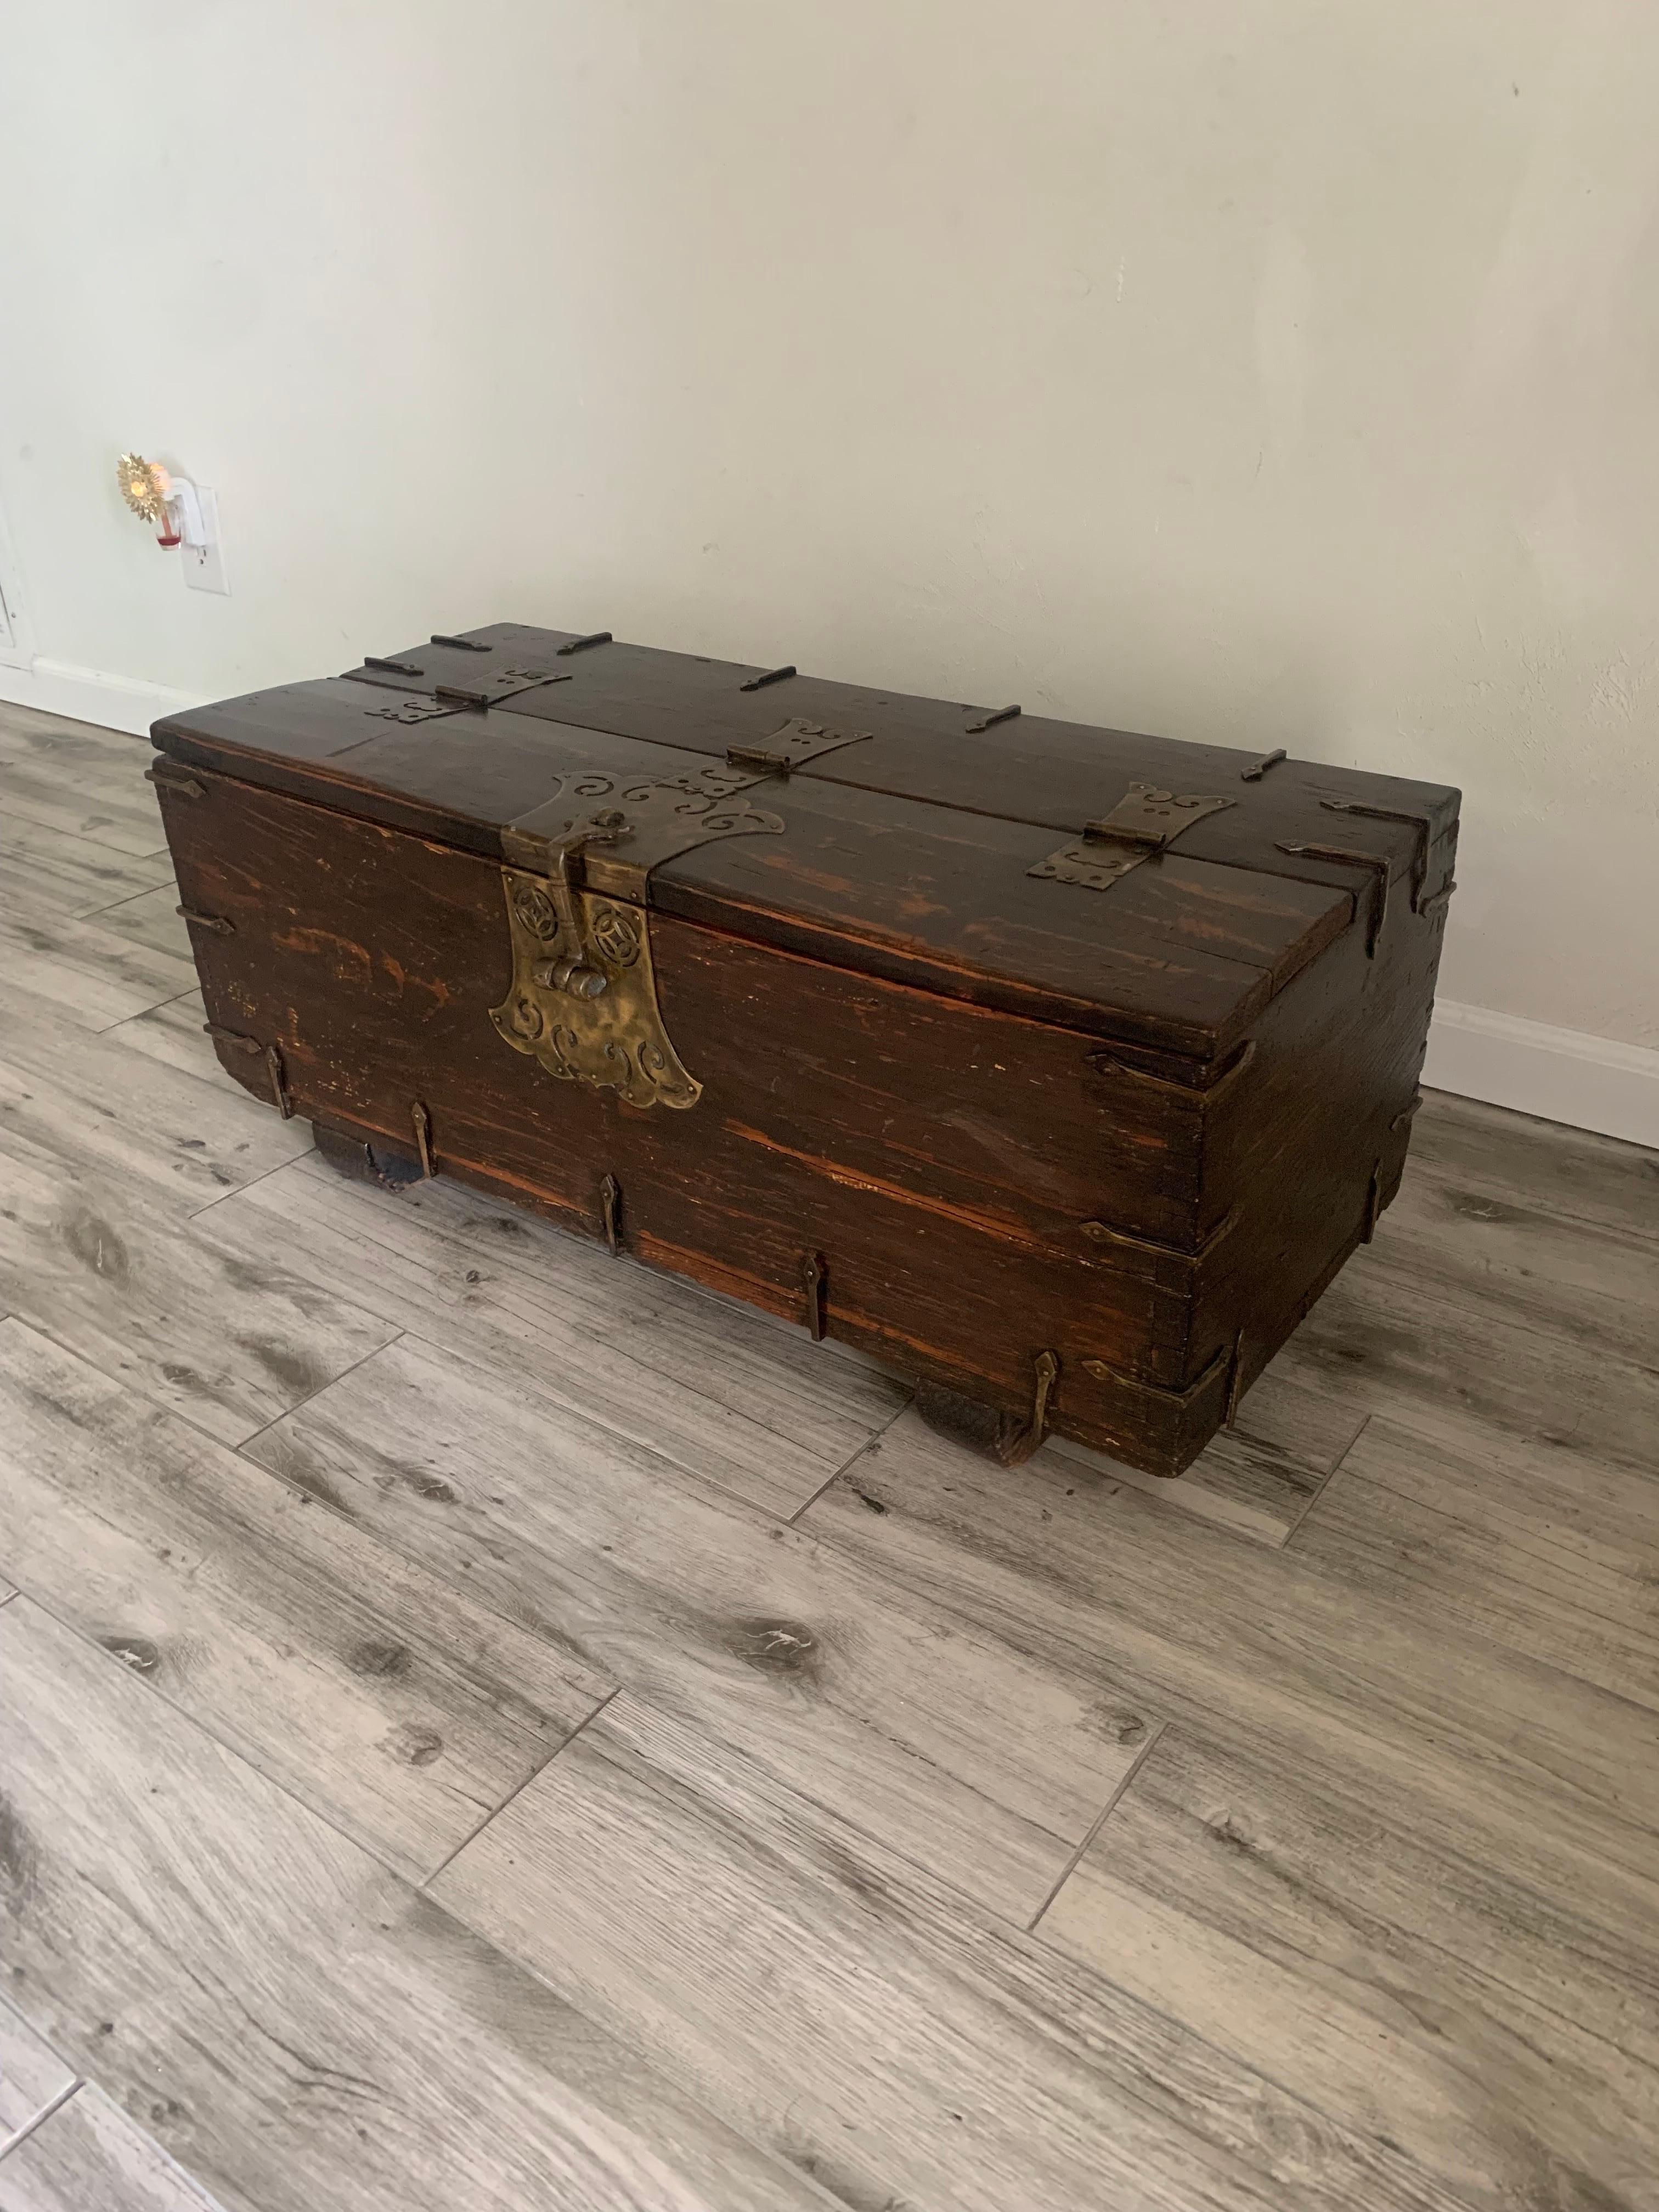 Charming antique coin box. From the Joseon Dynasty period. Chest is made from hardwood with dovetail joinery. 

Has heavy patina and shows it’s age very well. Has aged with grace. Hinges work great and offer plenty of storage inside.

34” long 15.5”